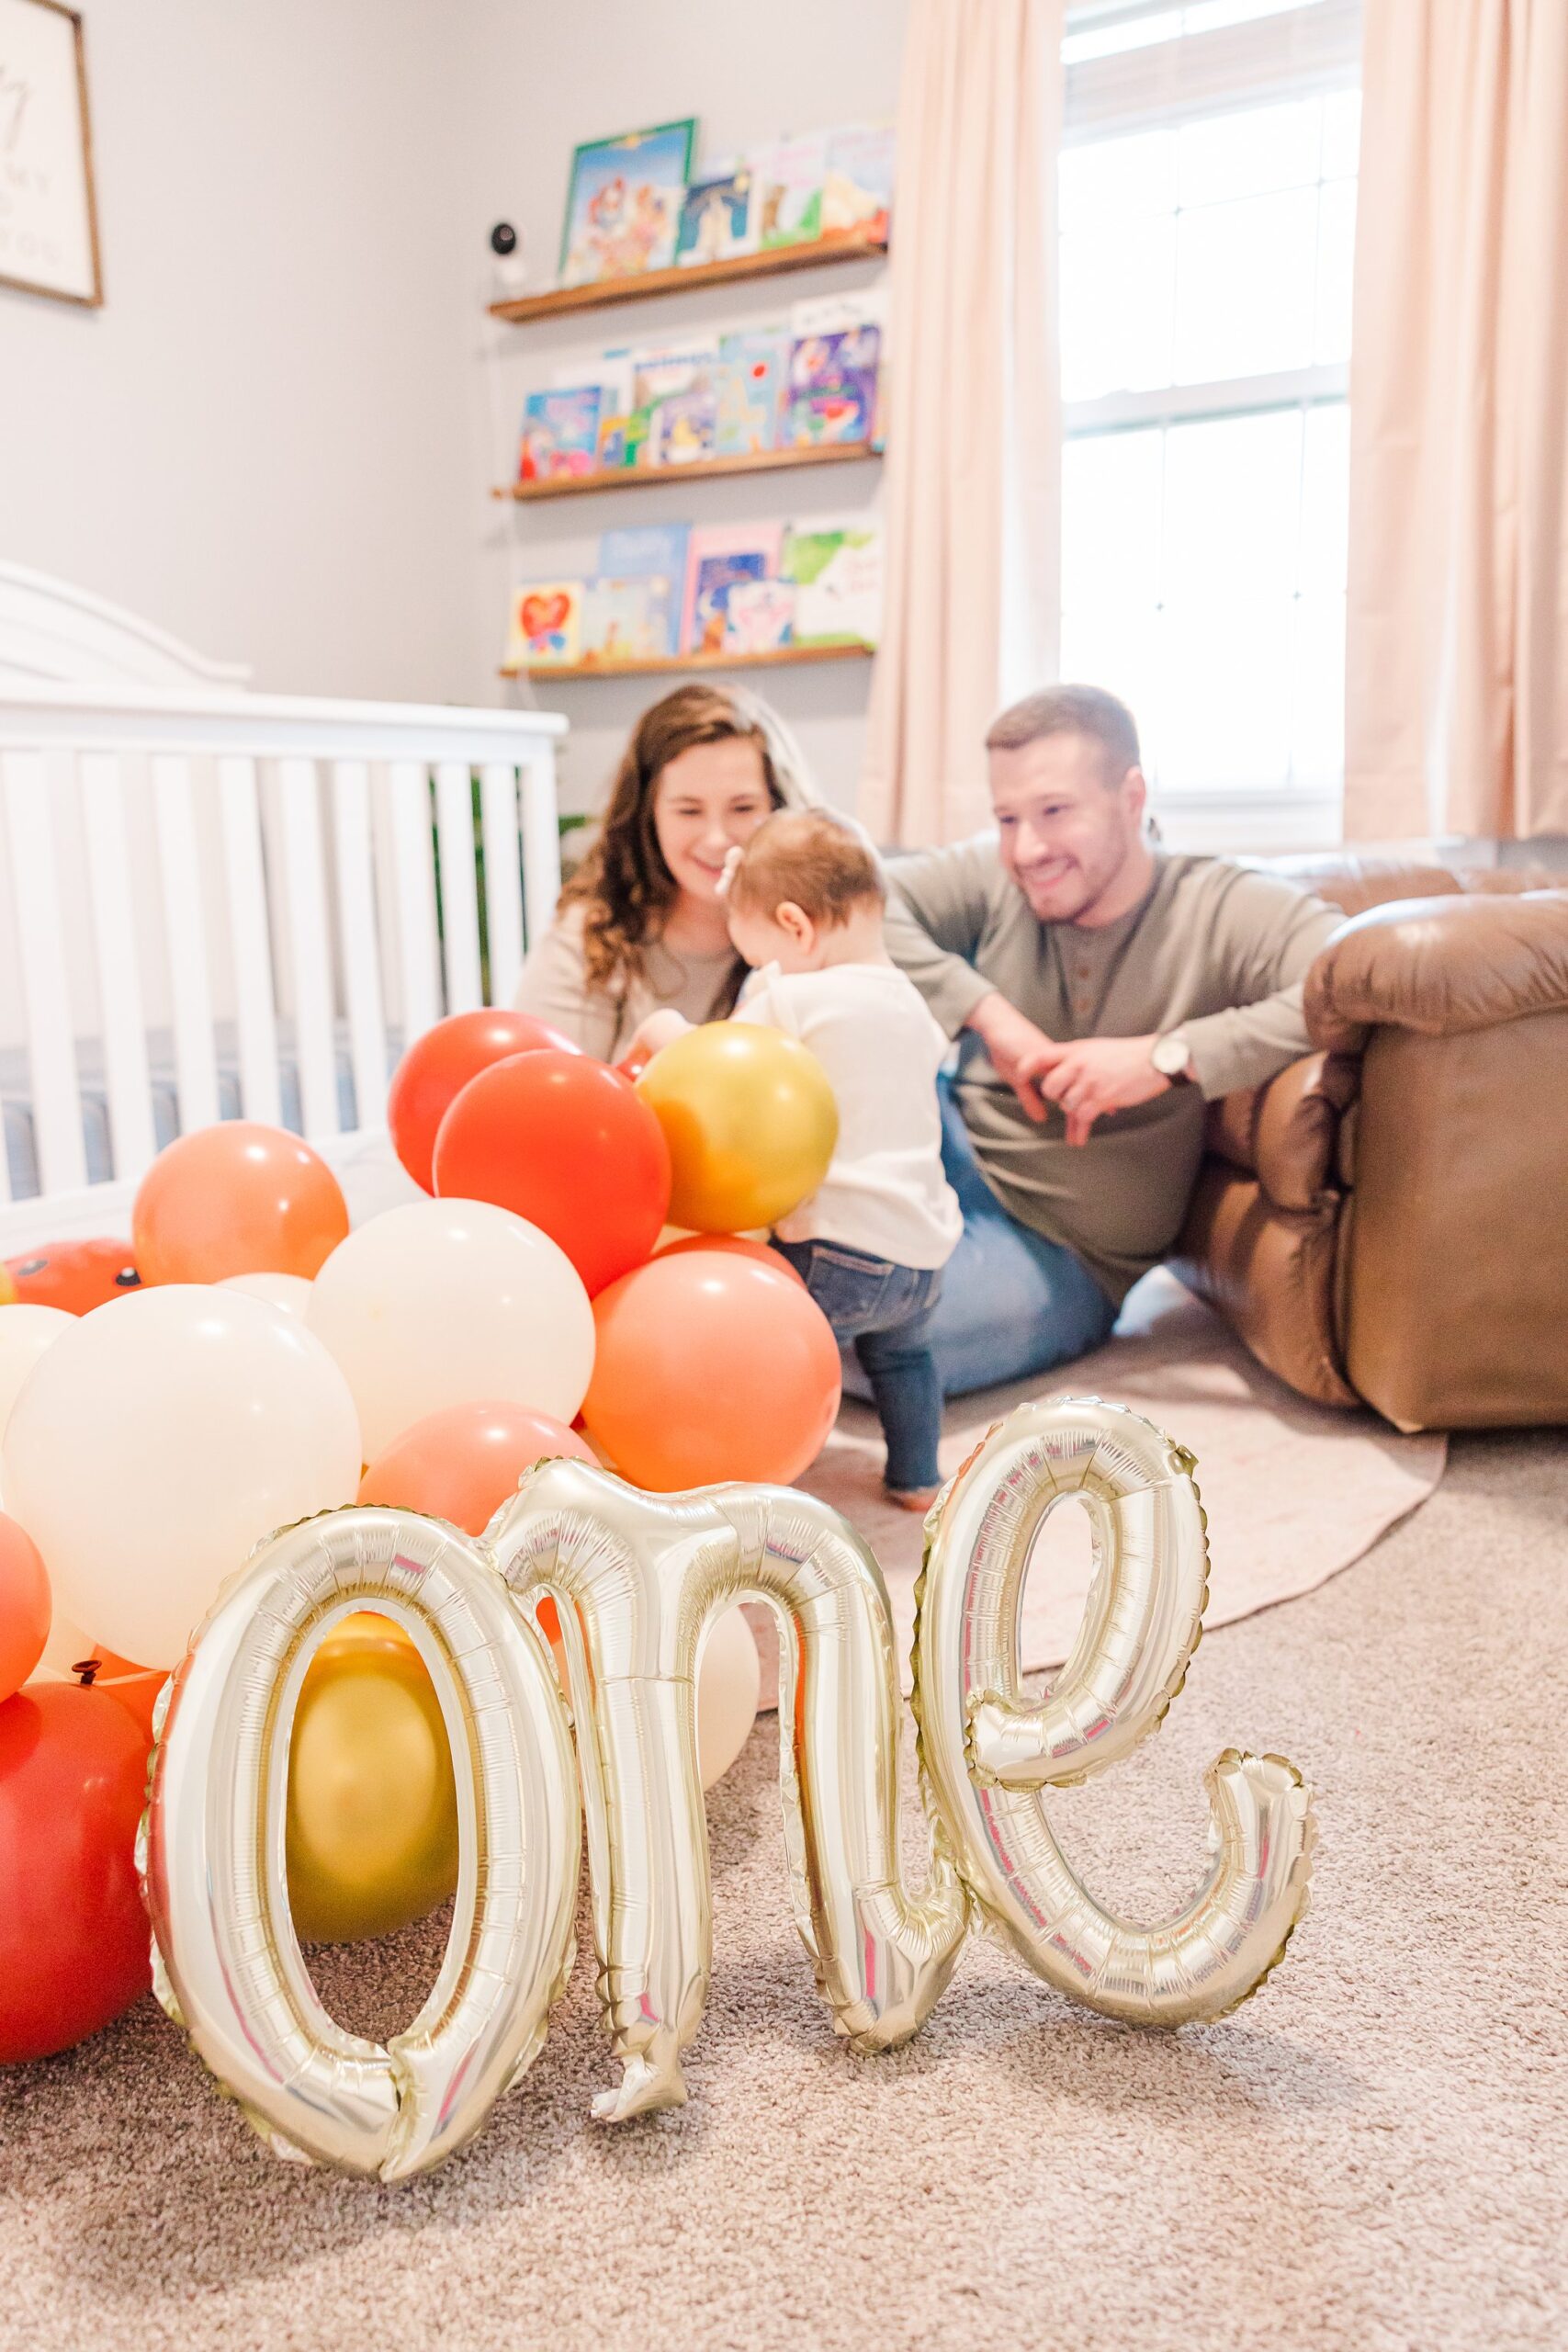 one year old with balloons on floor and parents looking on